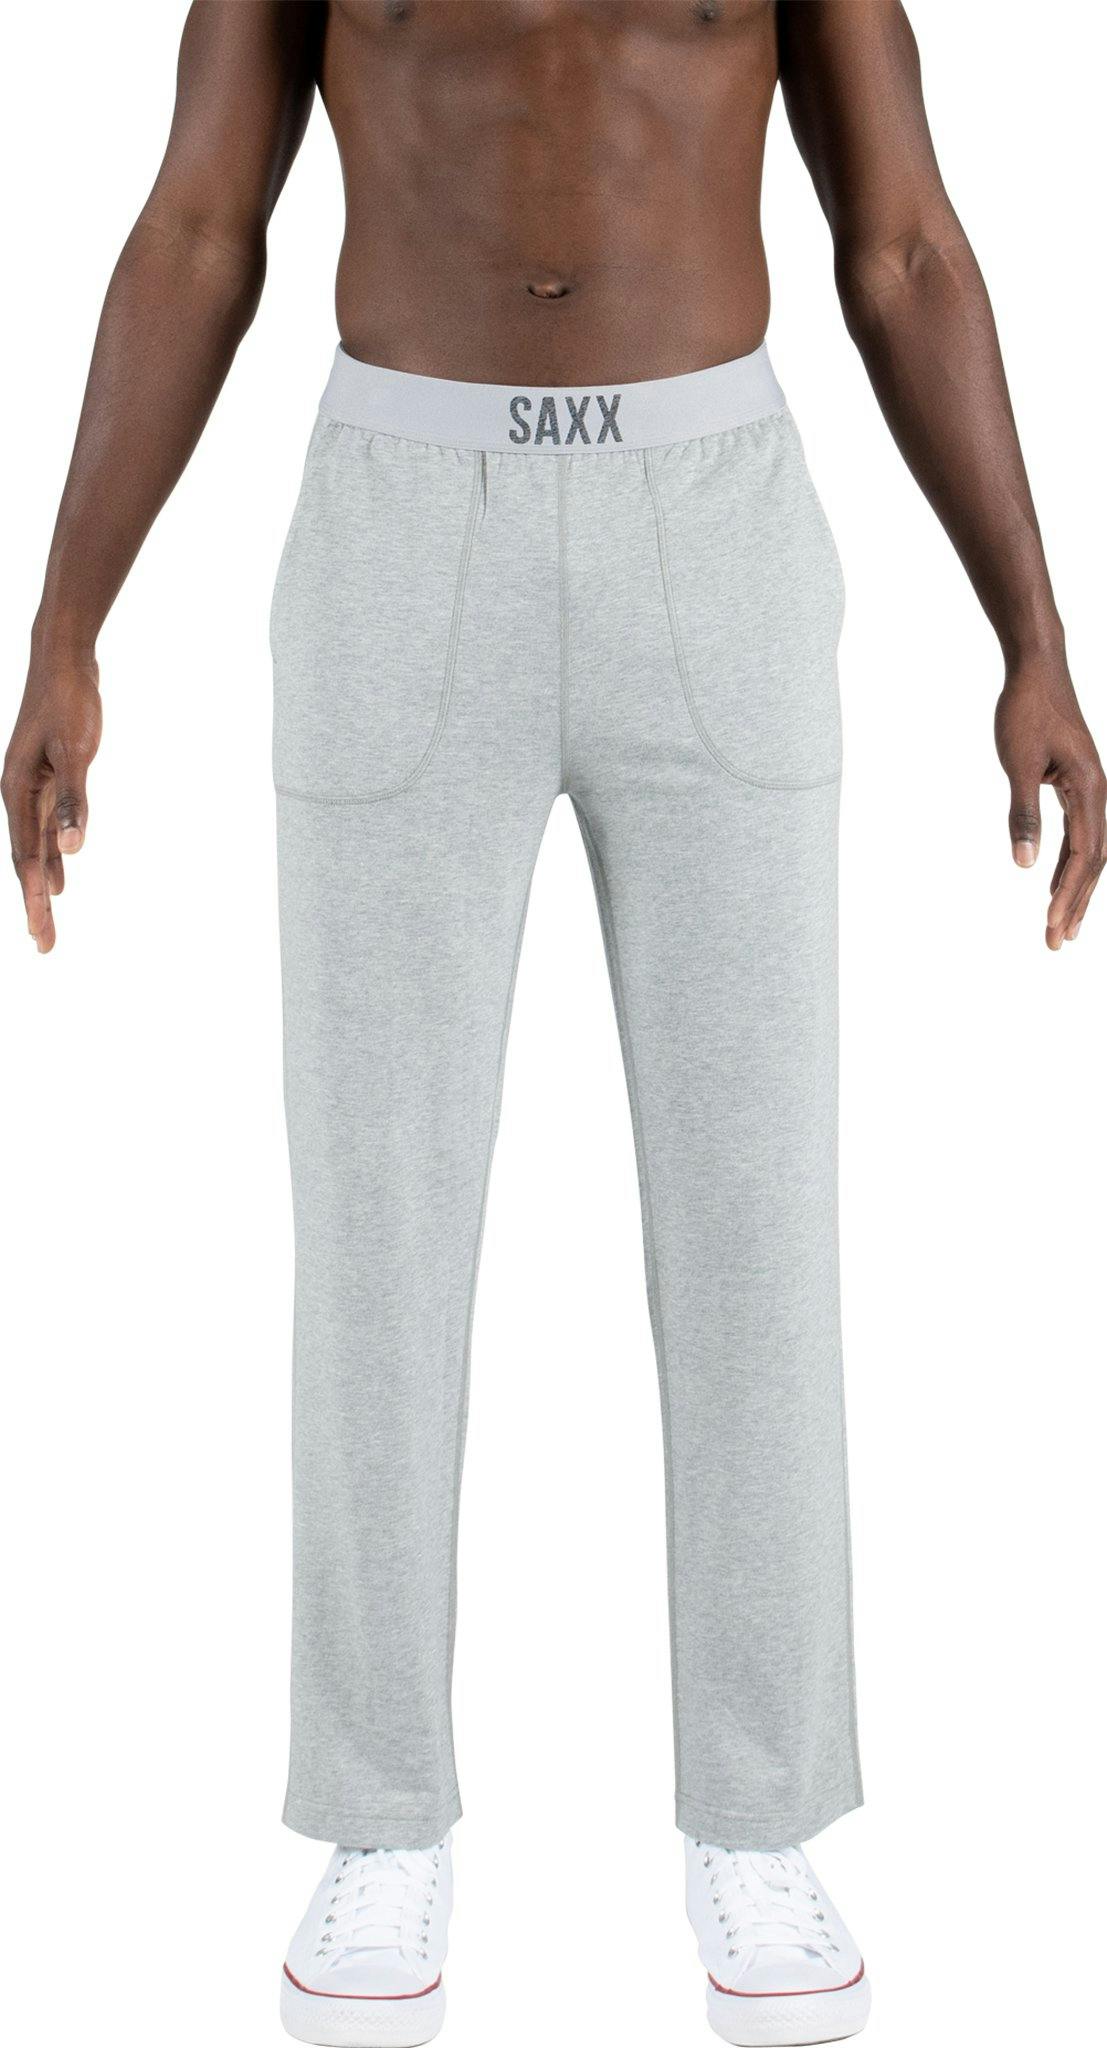 Product image for 3Six Five Lounge Pant - Men's